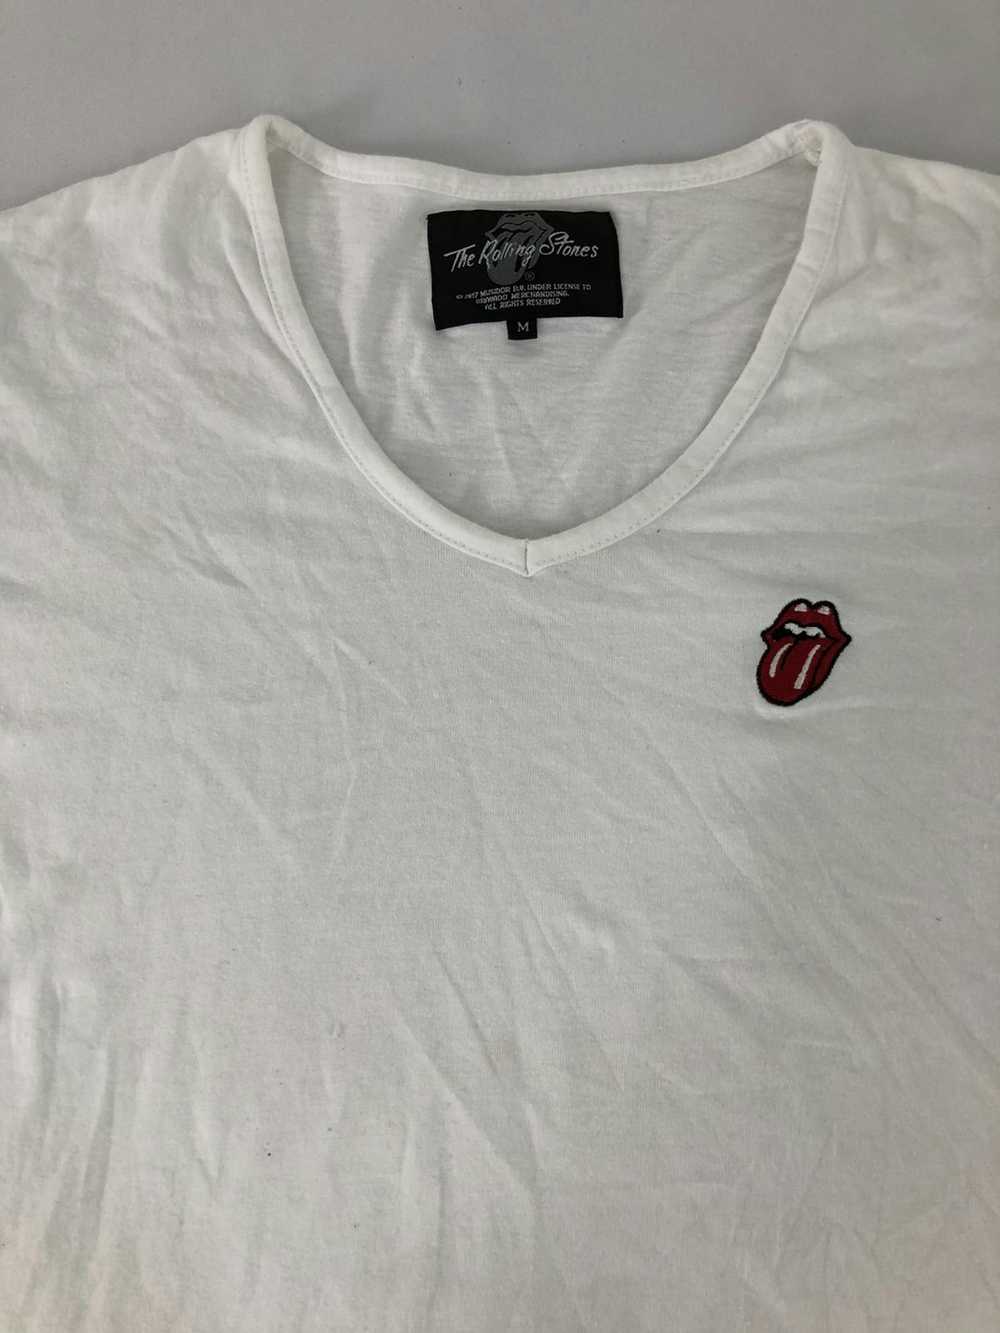 Band Tees × Rock Tees × The Rolling Stones The Ro… - image 4